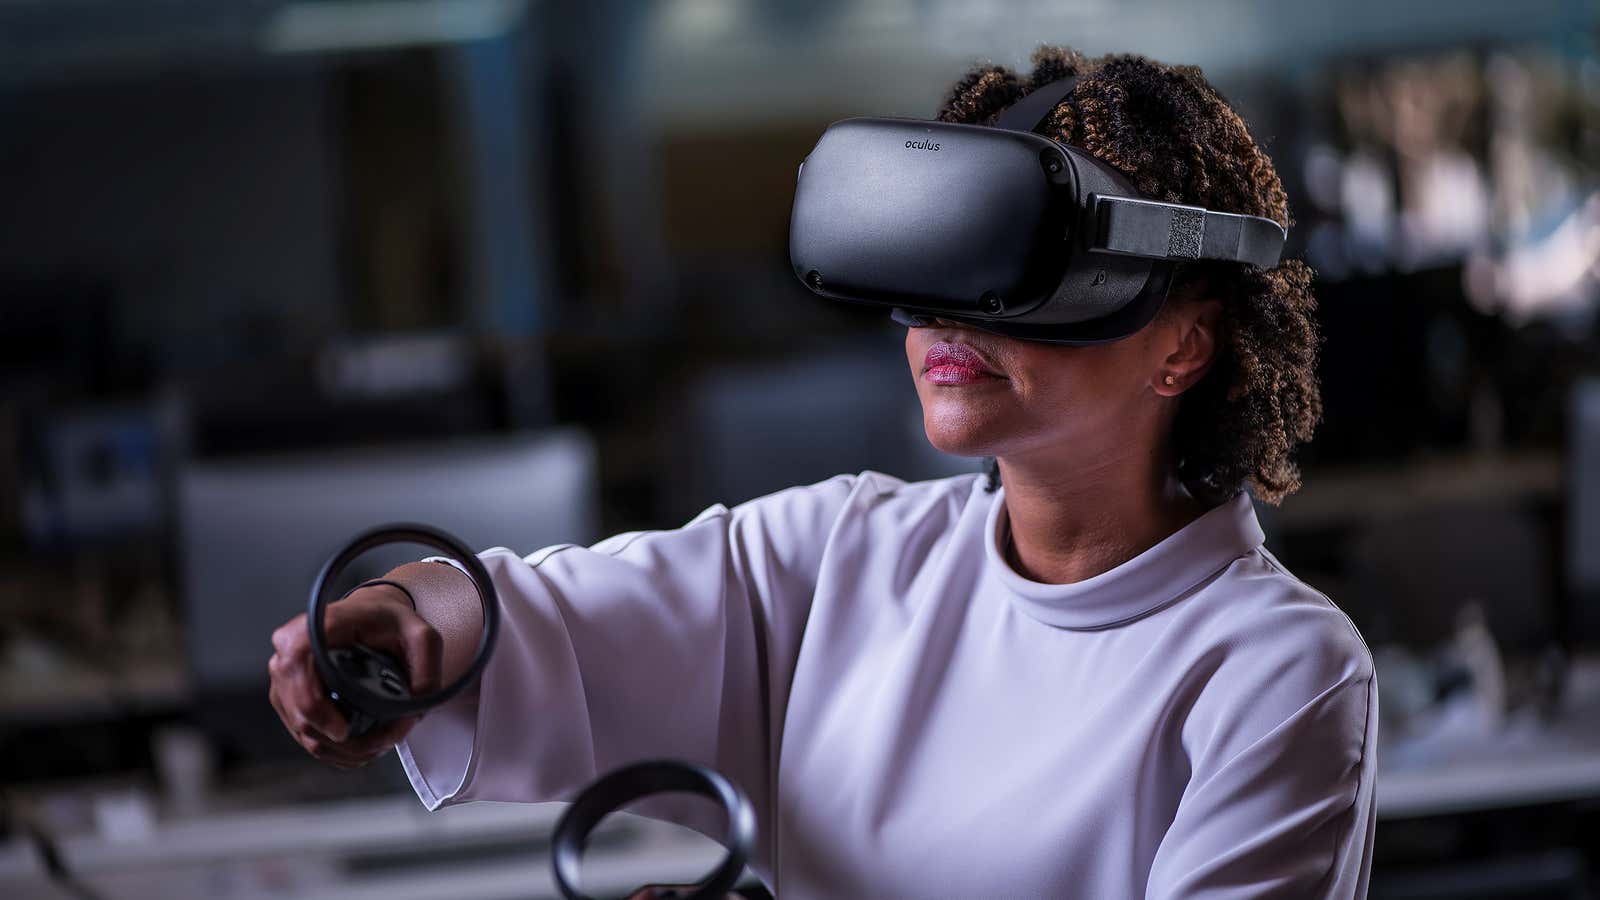 The Oculus Quest 1 VR headset.